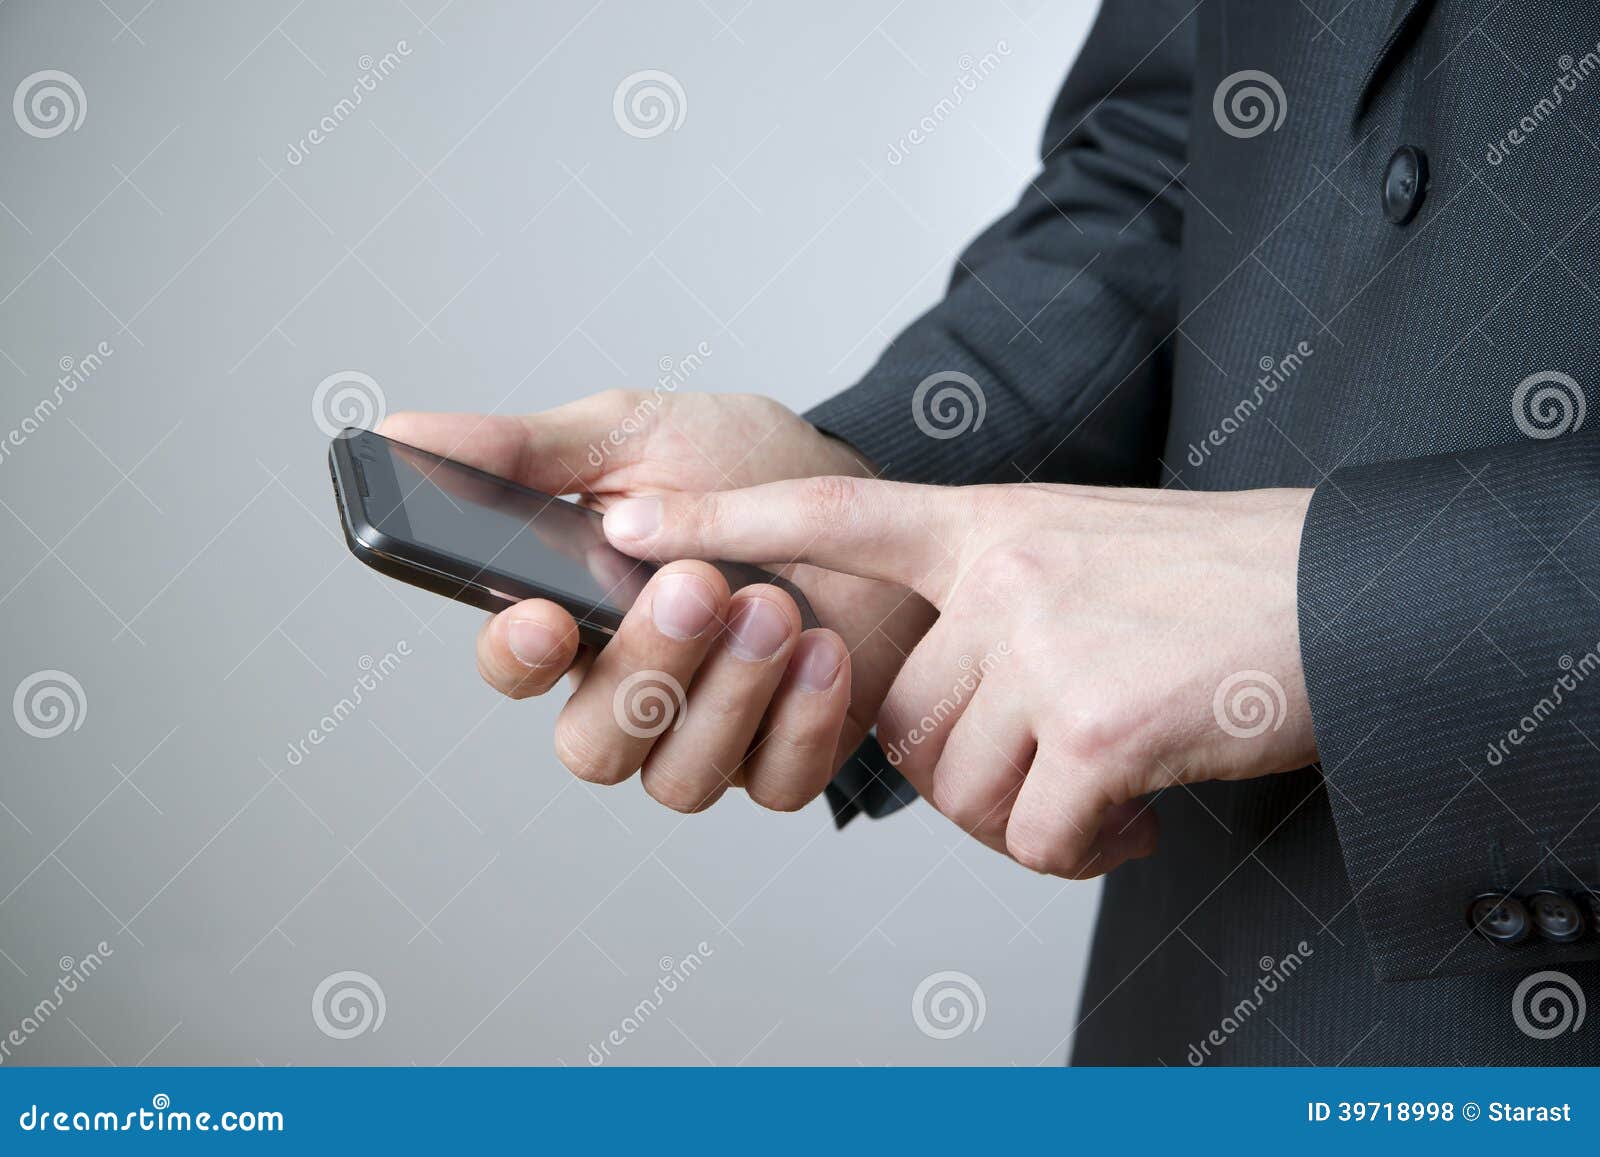 Businessman Using Smartphone Stock Photo - Image of male, cell: 39718998